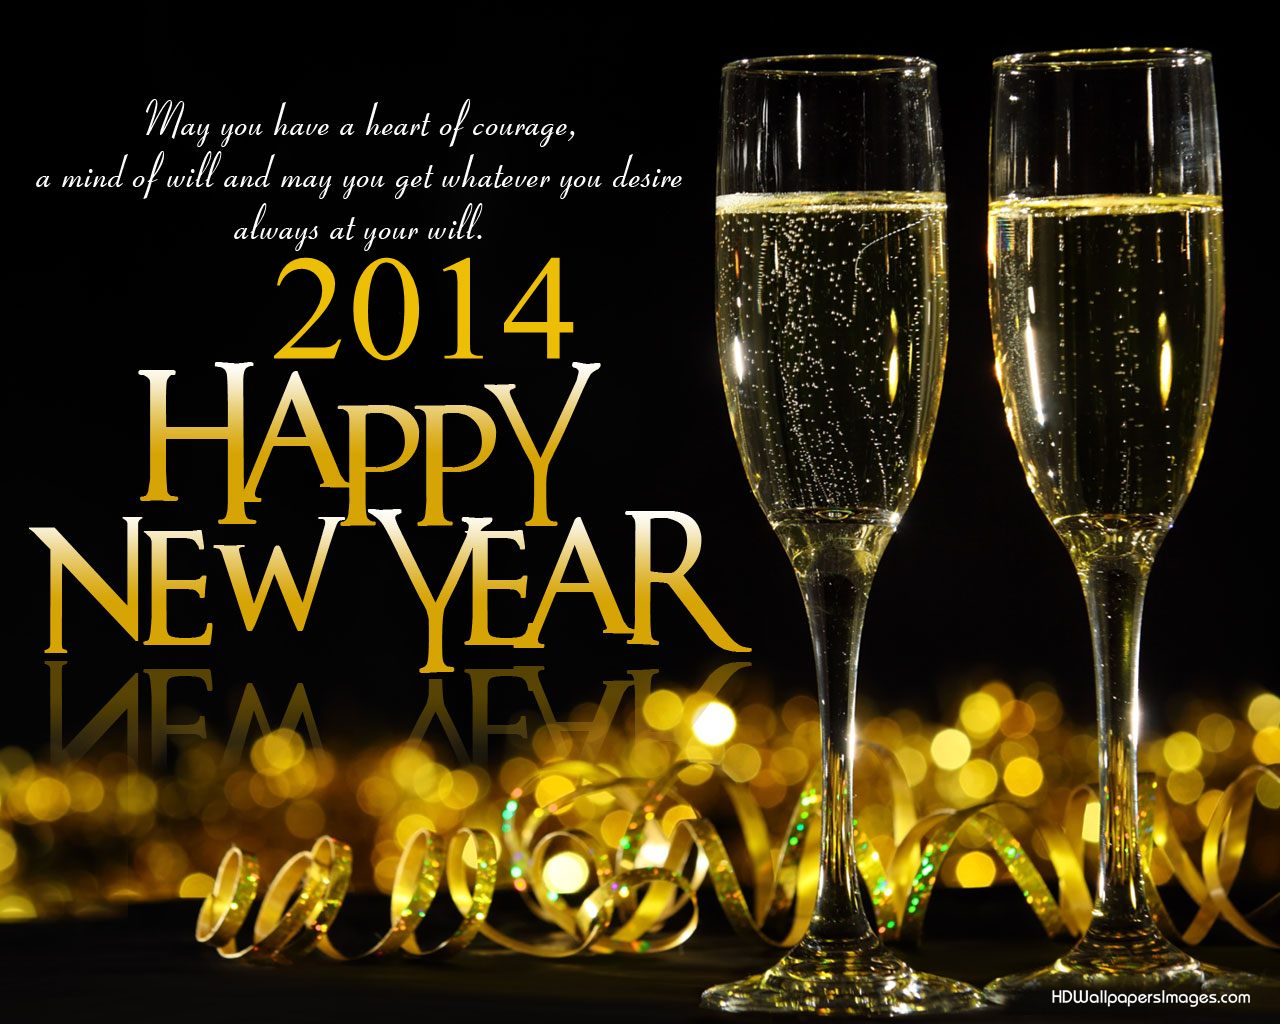 Nice wallpapers New Year 2014 1280x1024px